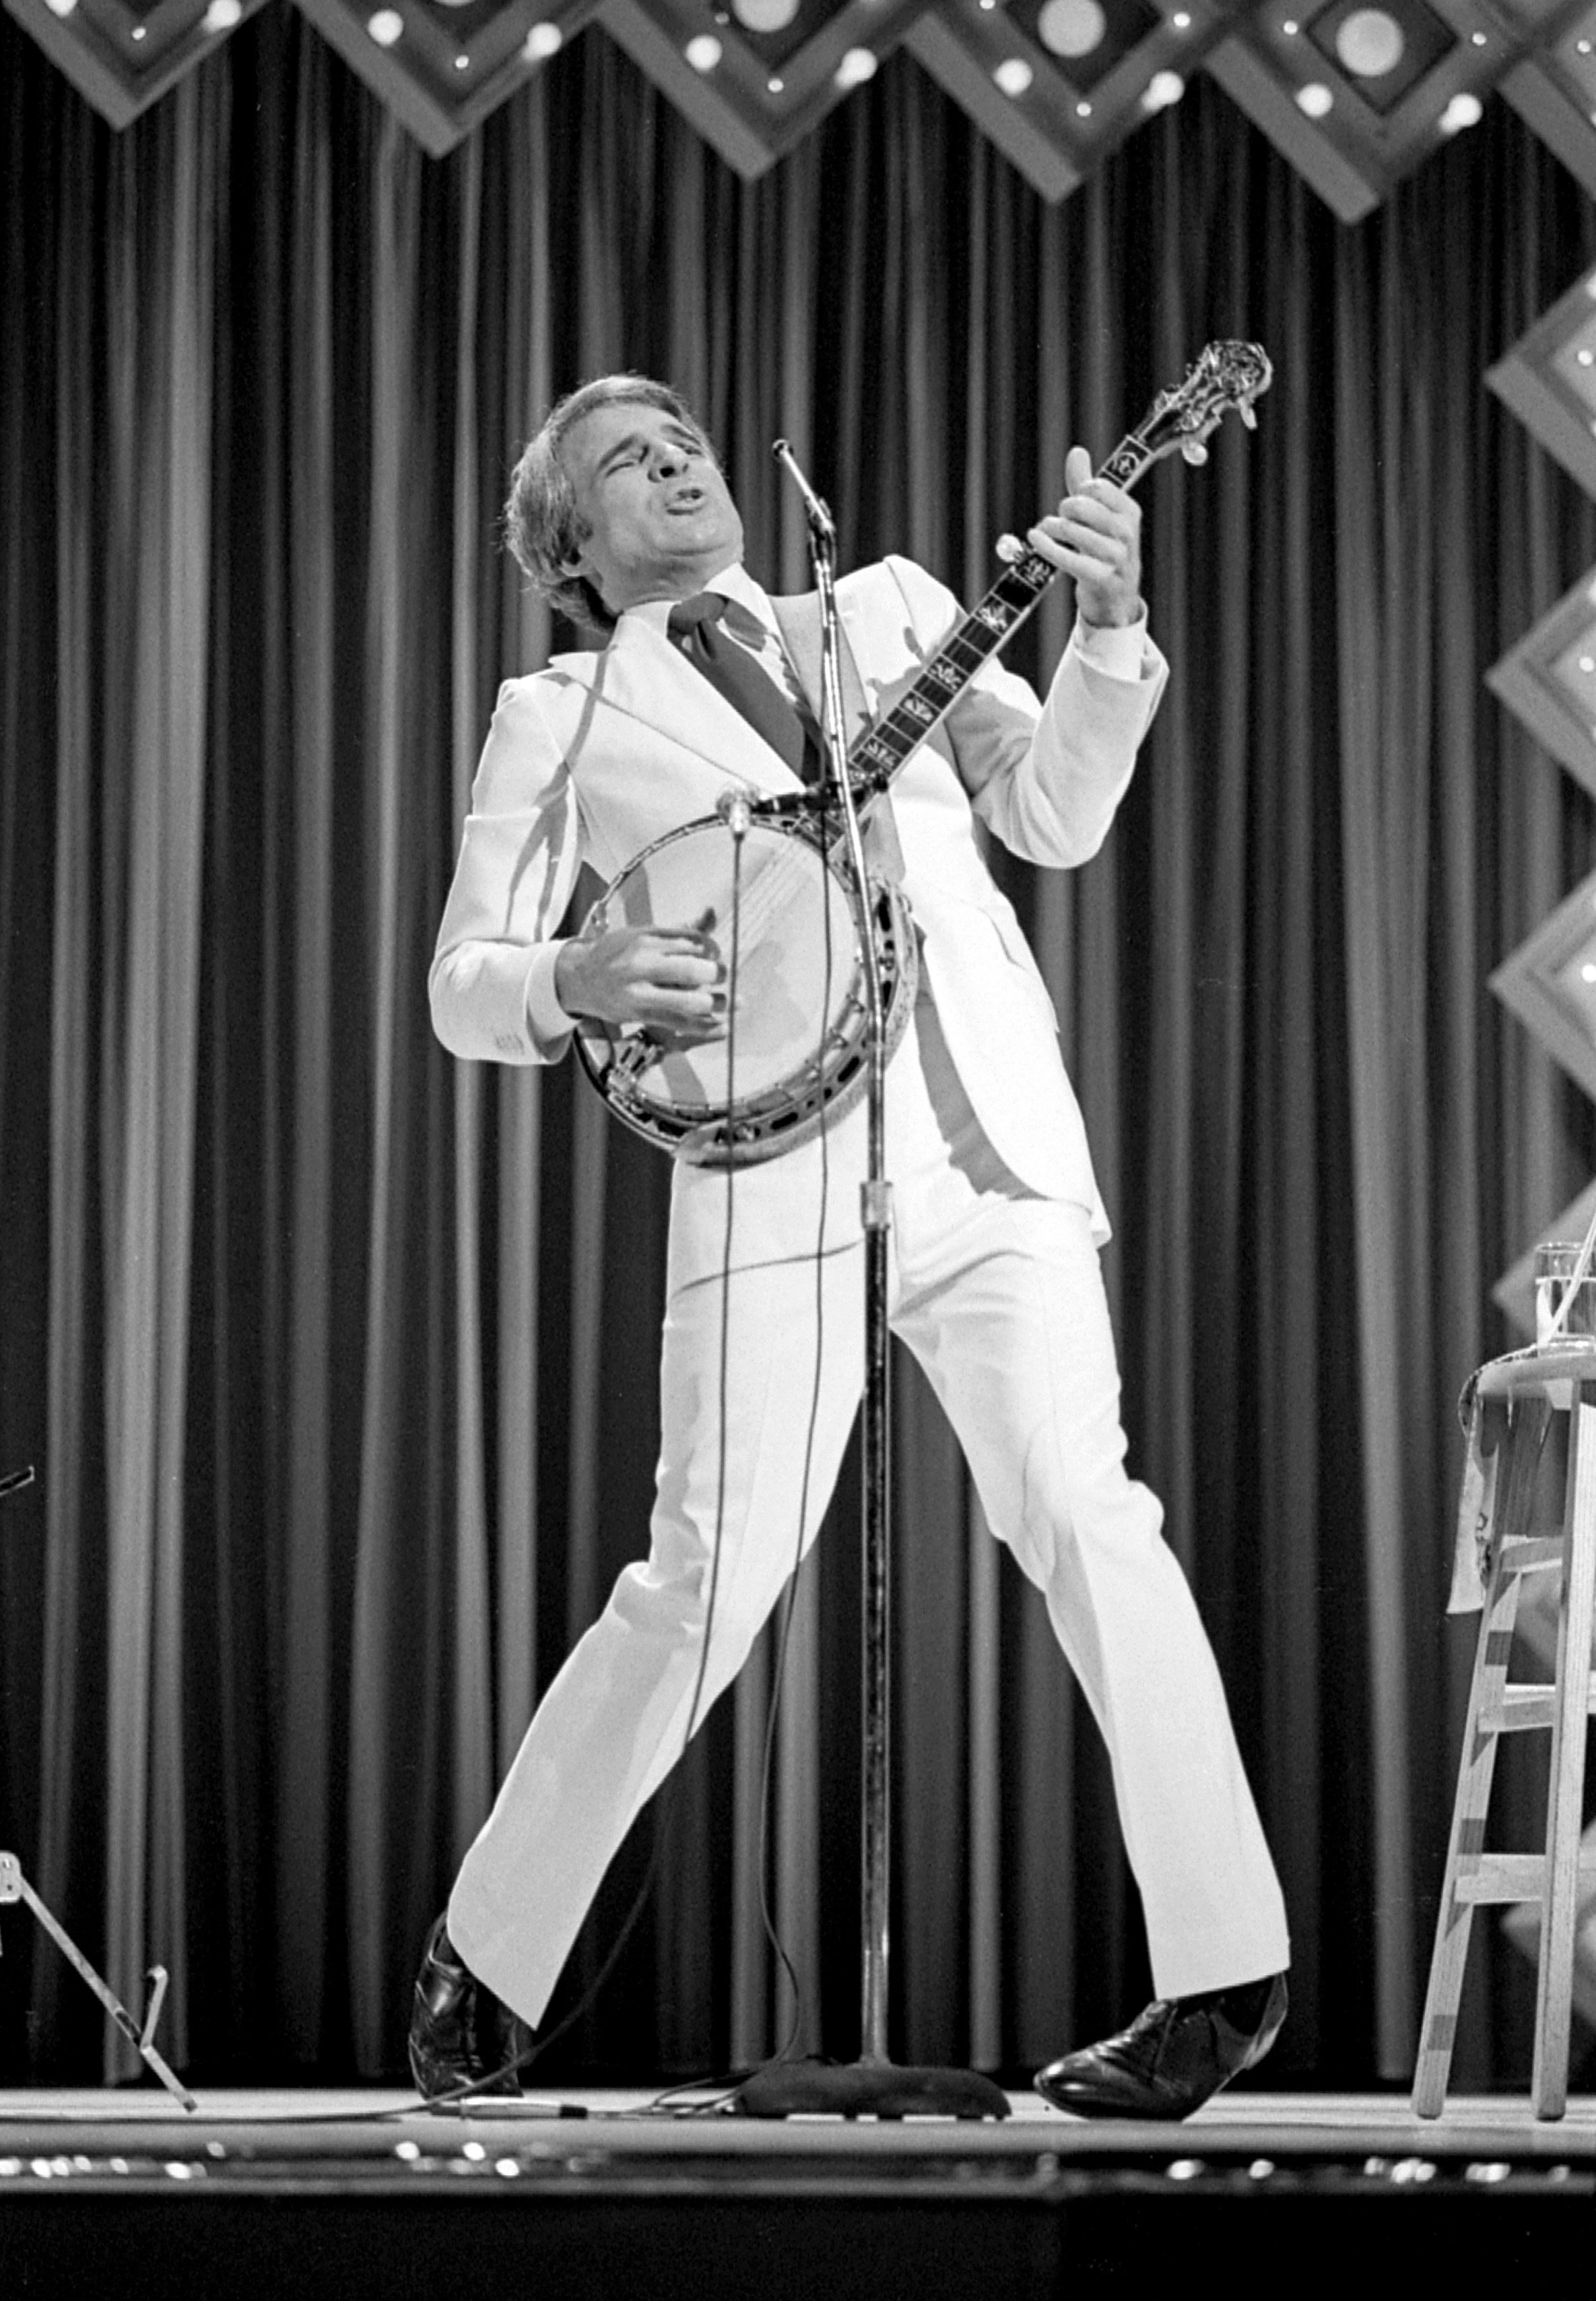 A young Steve Martin performs stand-up onstage while playing a banjo and dancing